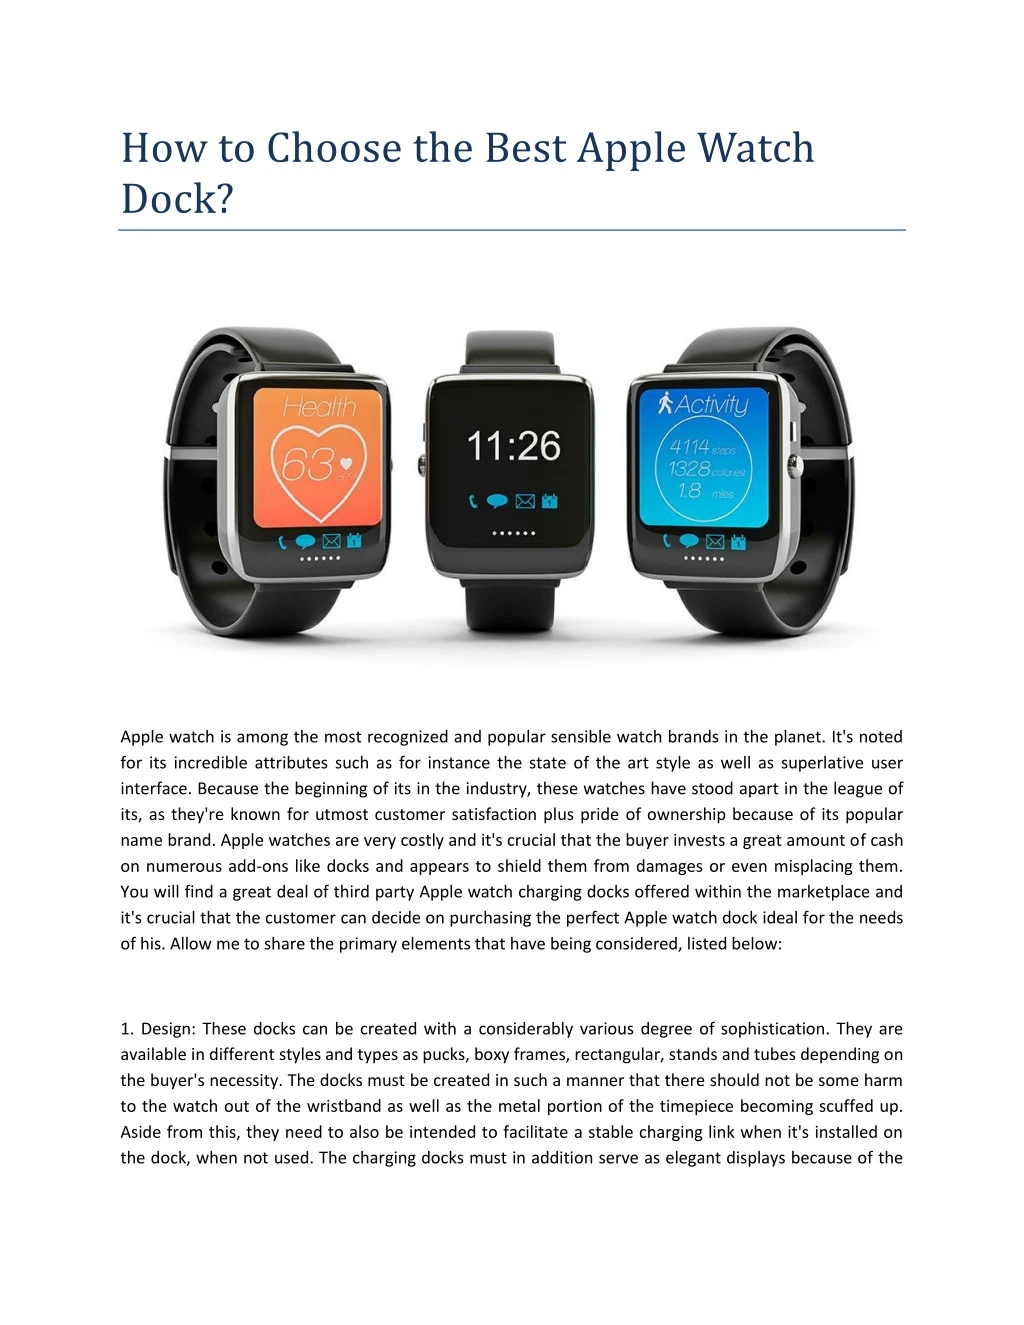 how to choose the best apple watch dock